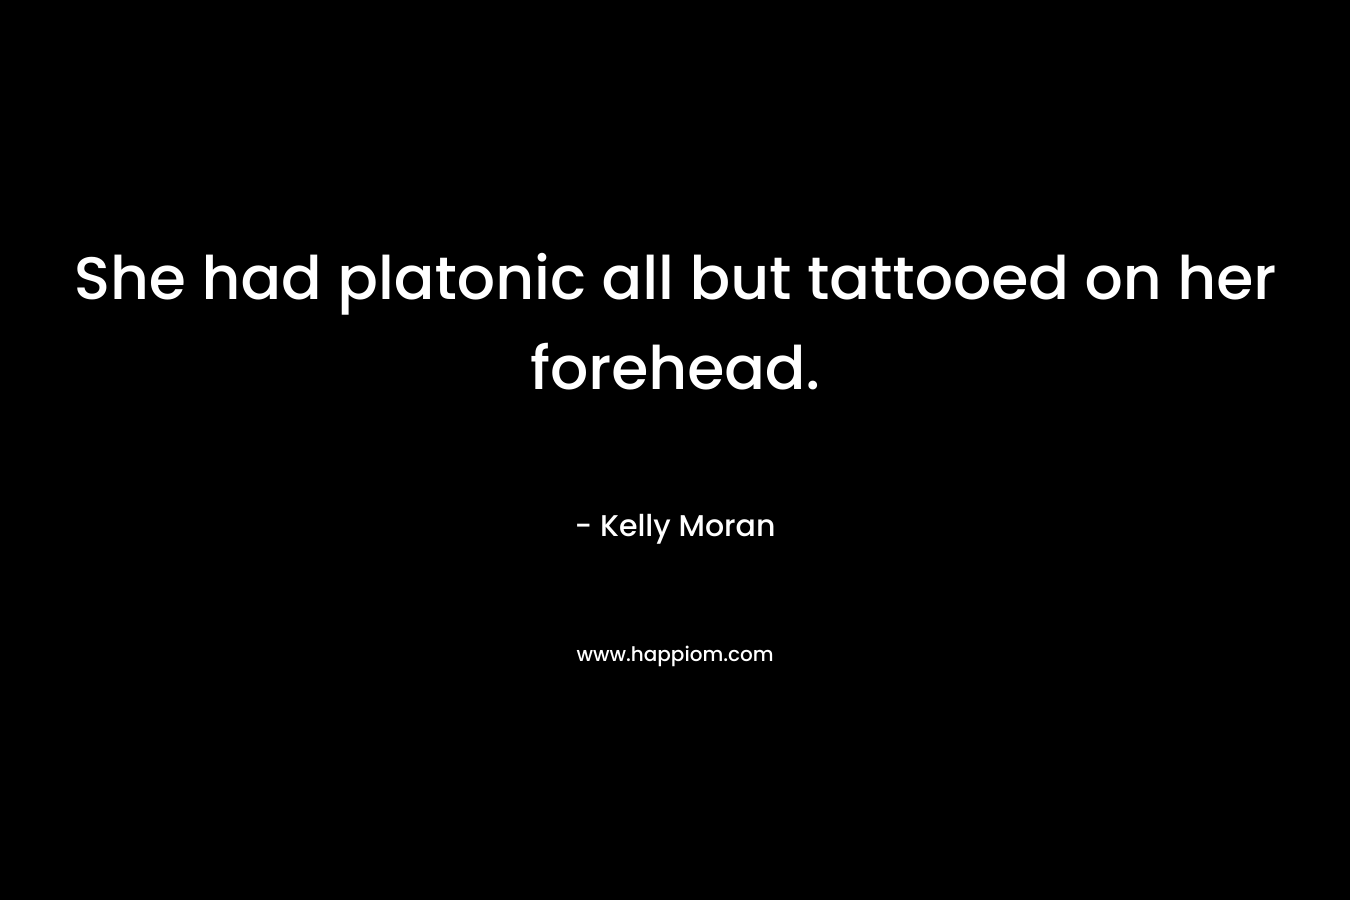 She had platonic all but tattooed on her forehead.